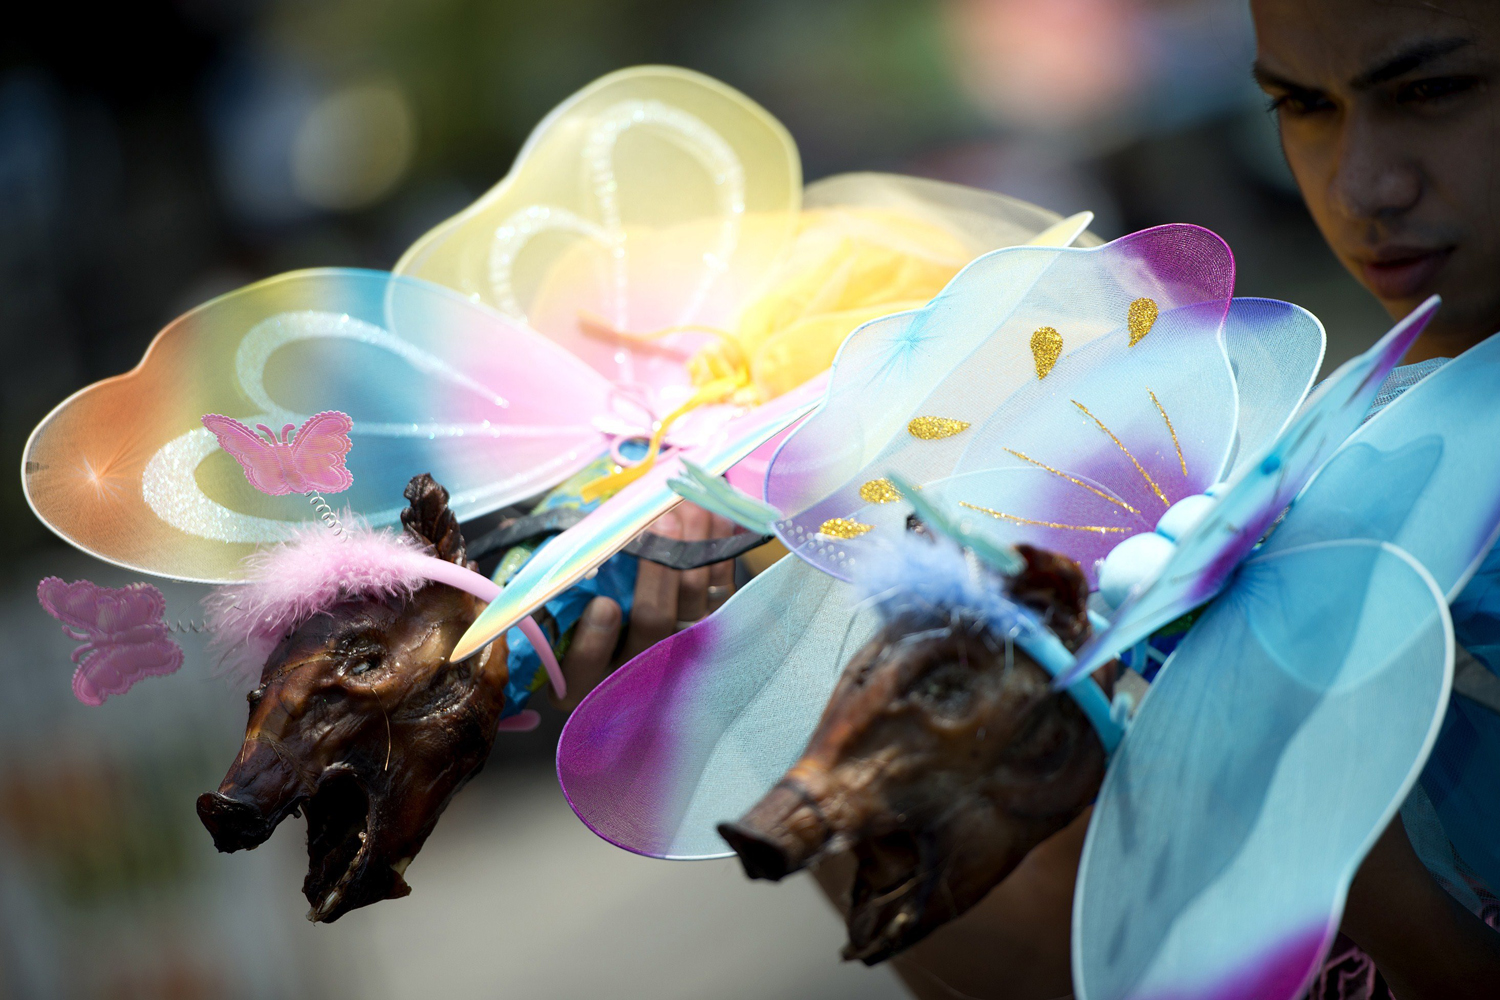 A worker holds two roasted pigs dressed as fairies which will be paraded through the La Loma district of Manila on May 18, 2014, as part of an annual festival.